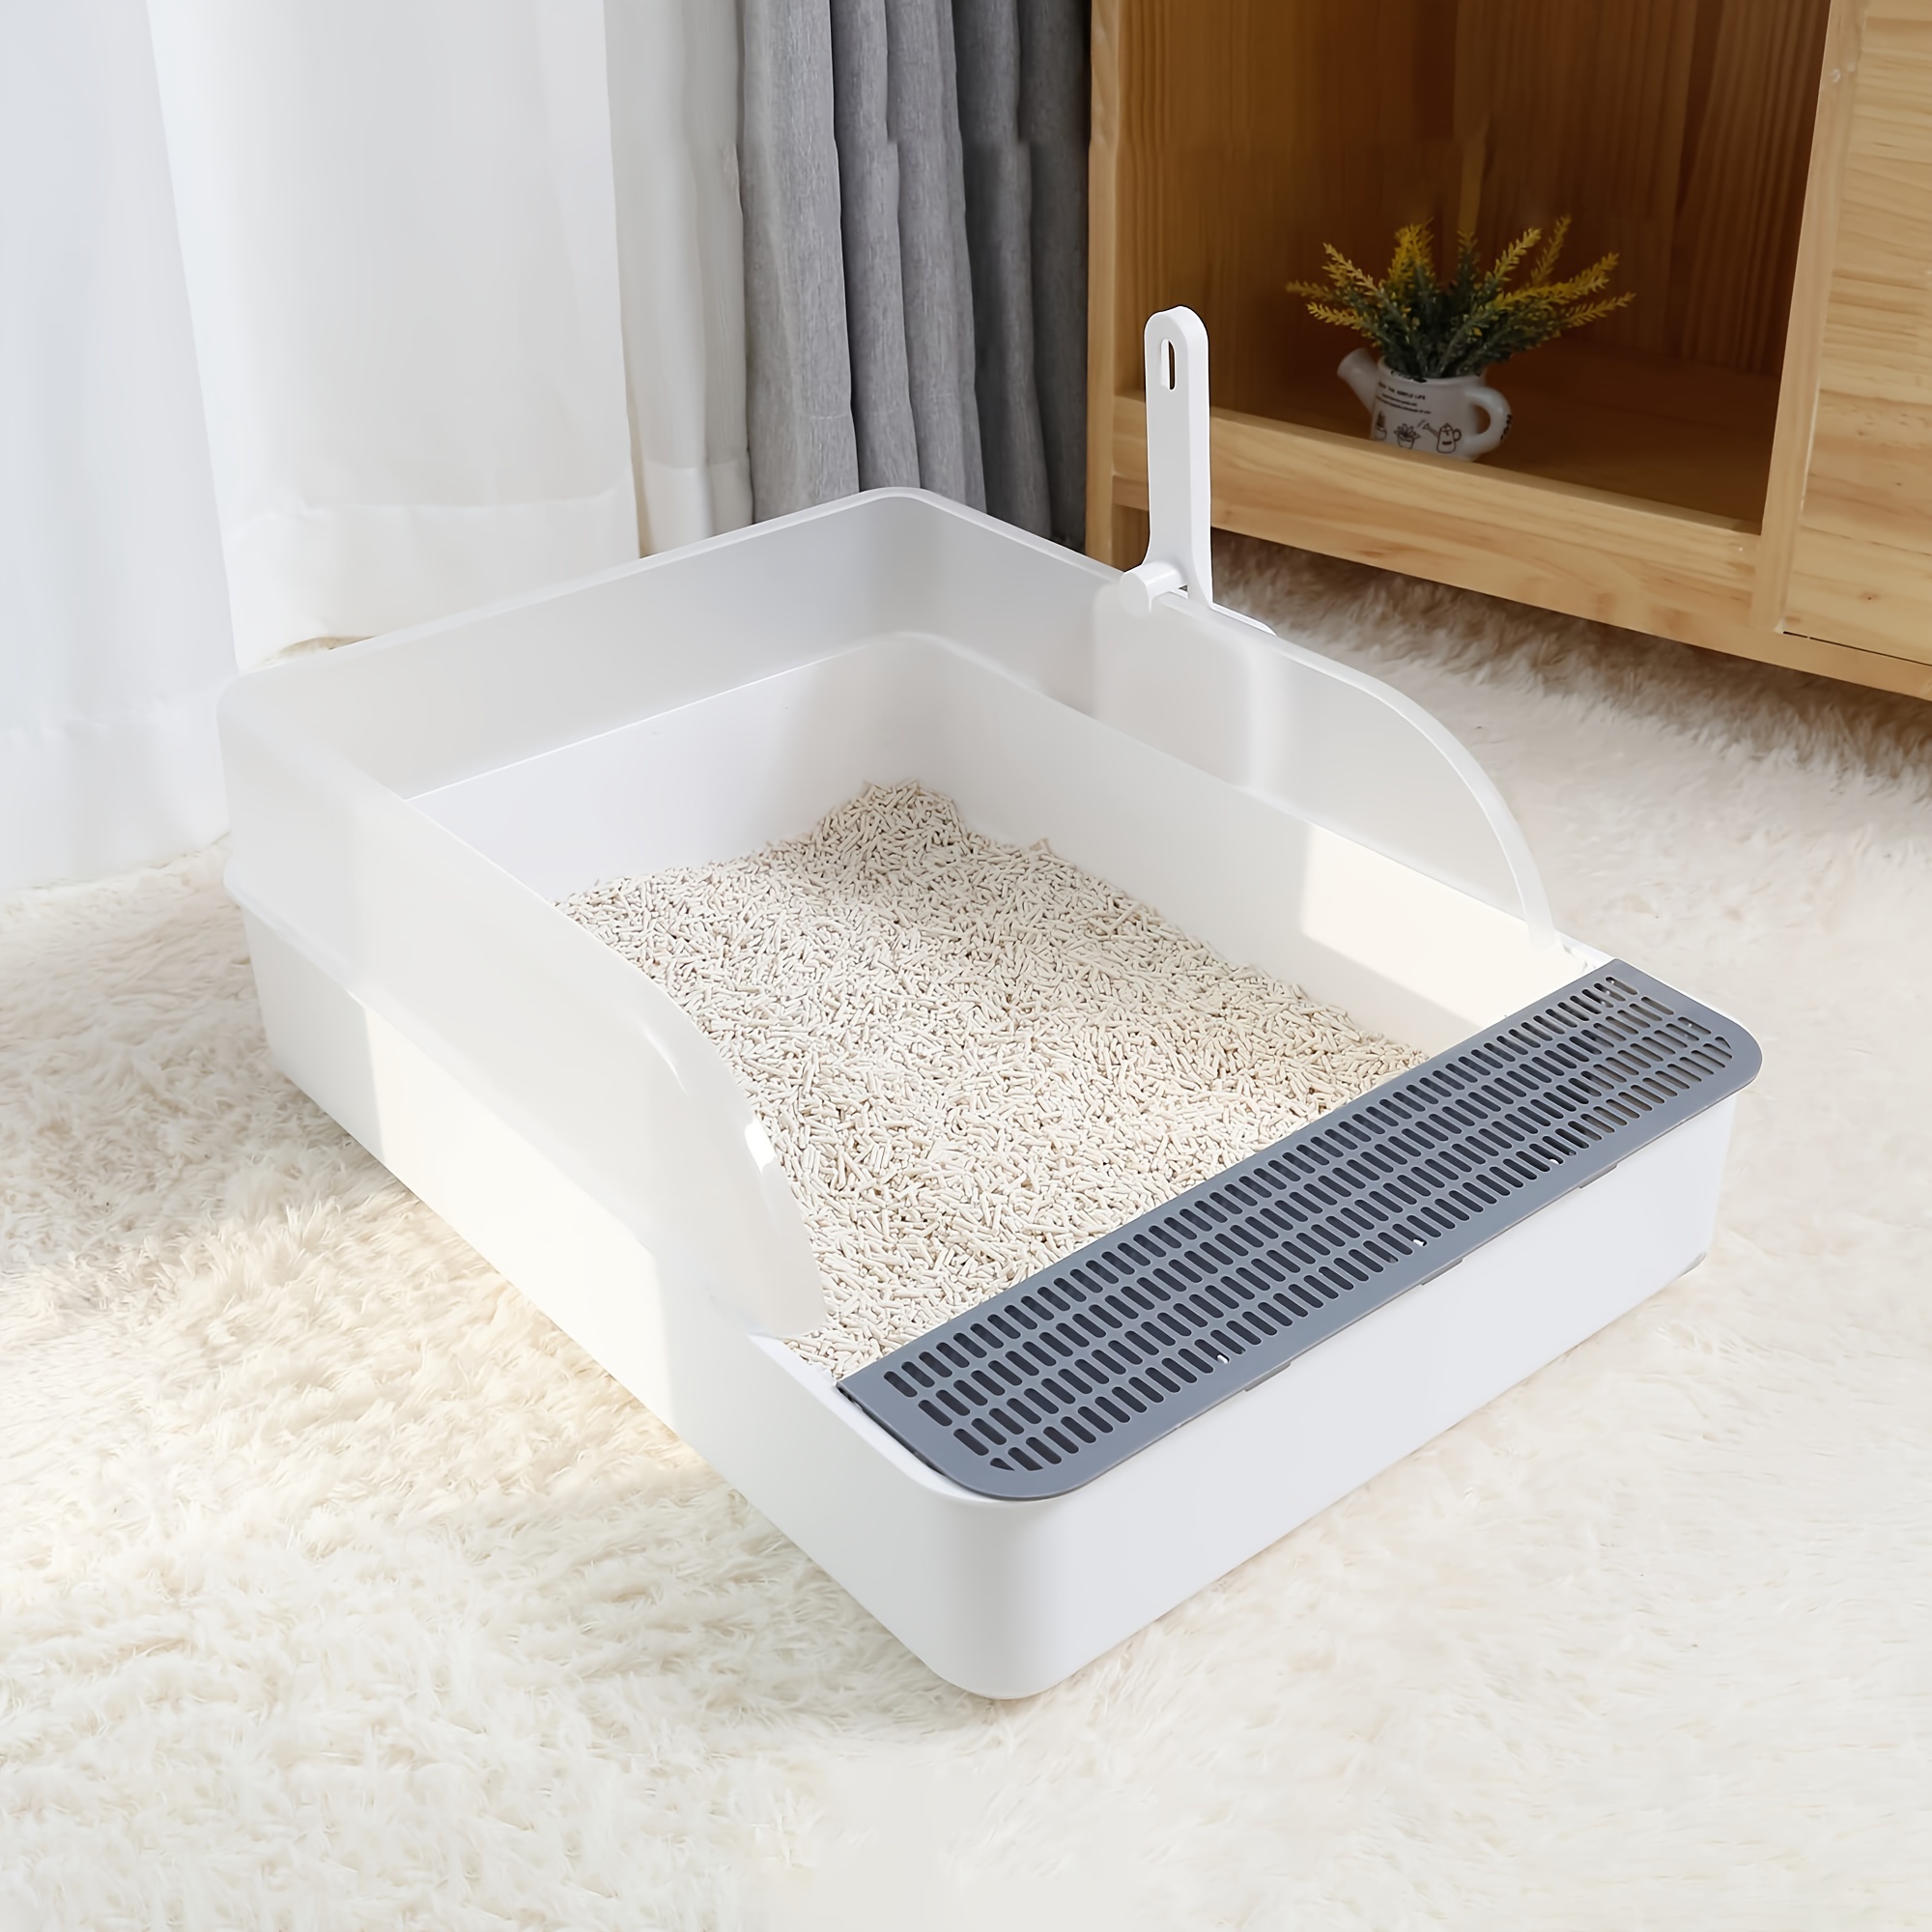 

Spacious 20" Open Cat Litter Pan With Snap-on Enclosure | Easy To Clean Design | Oversized For All Cat Ages | Sleek Elevated Barrier To Prevent Litter Spillage | Ventilated To Reduce Bacterial Growth